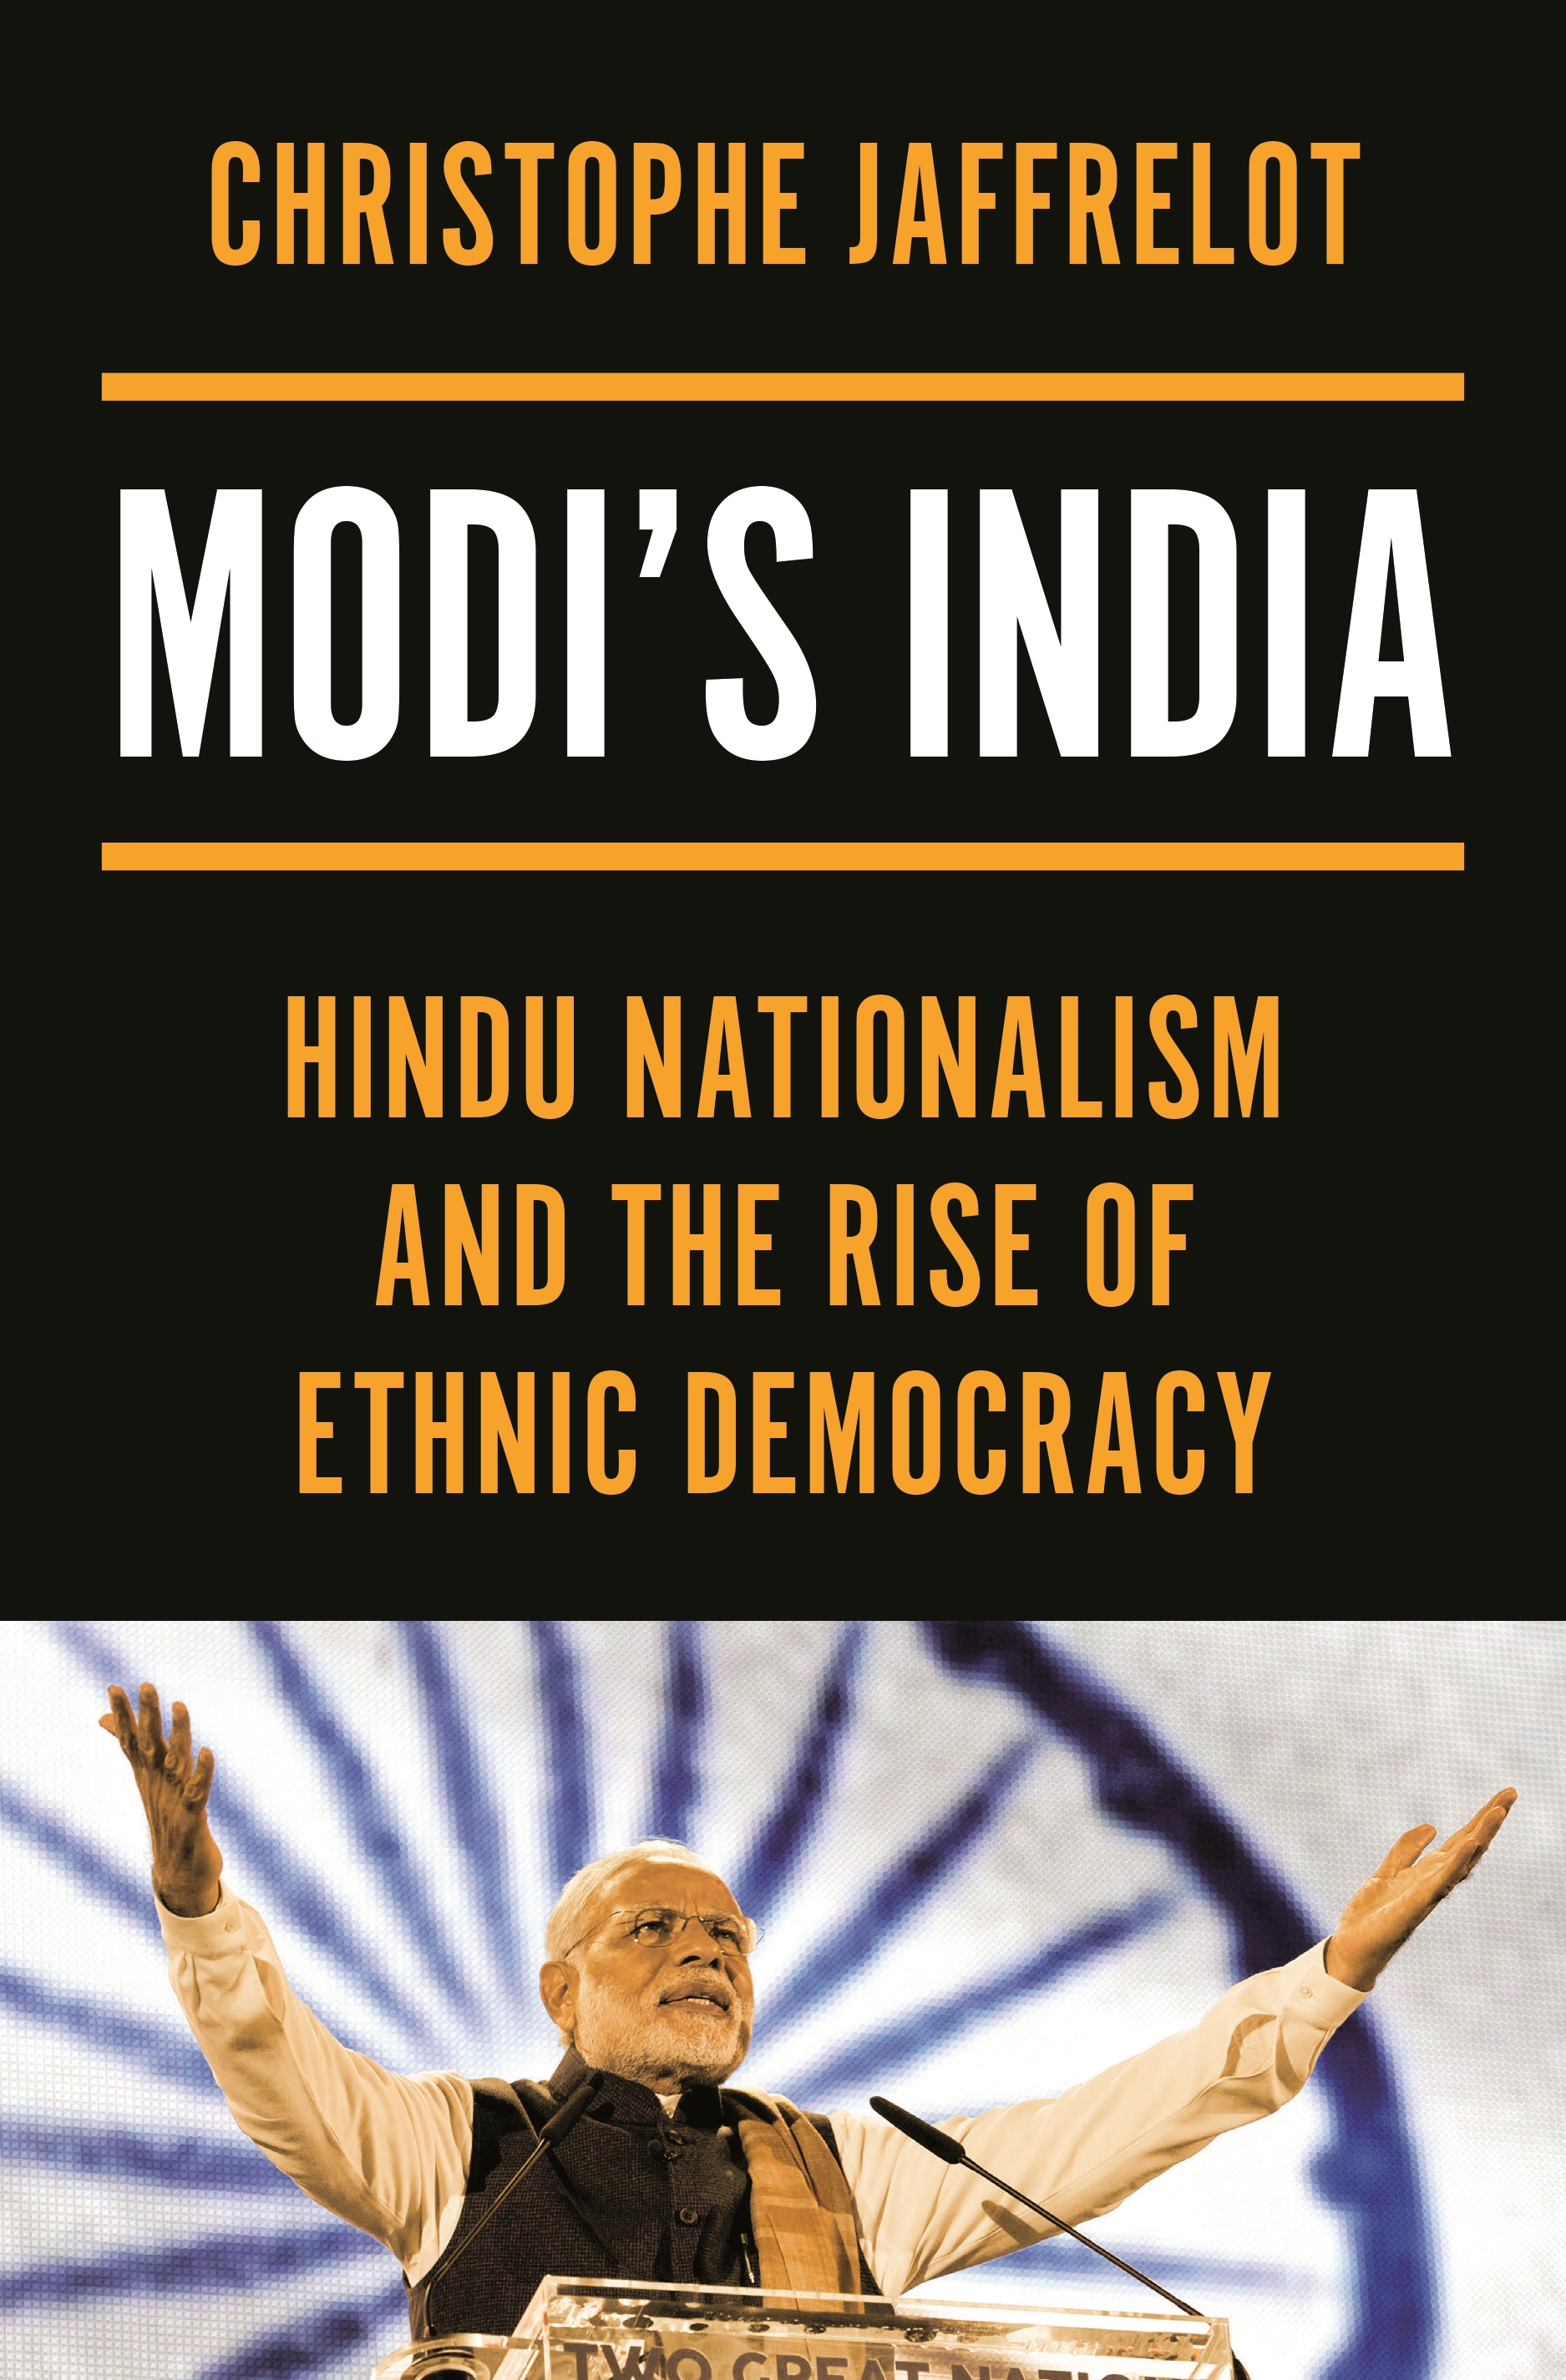 June 27 – Rise of Hindu Nationalism in the United States